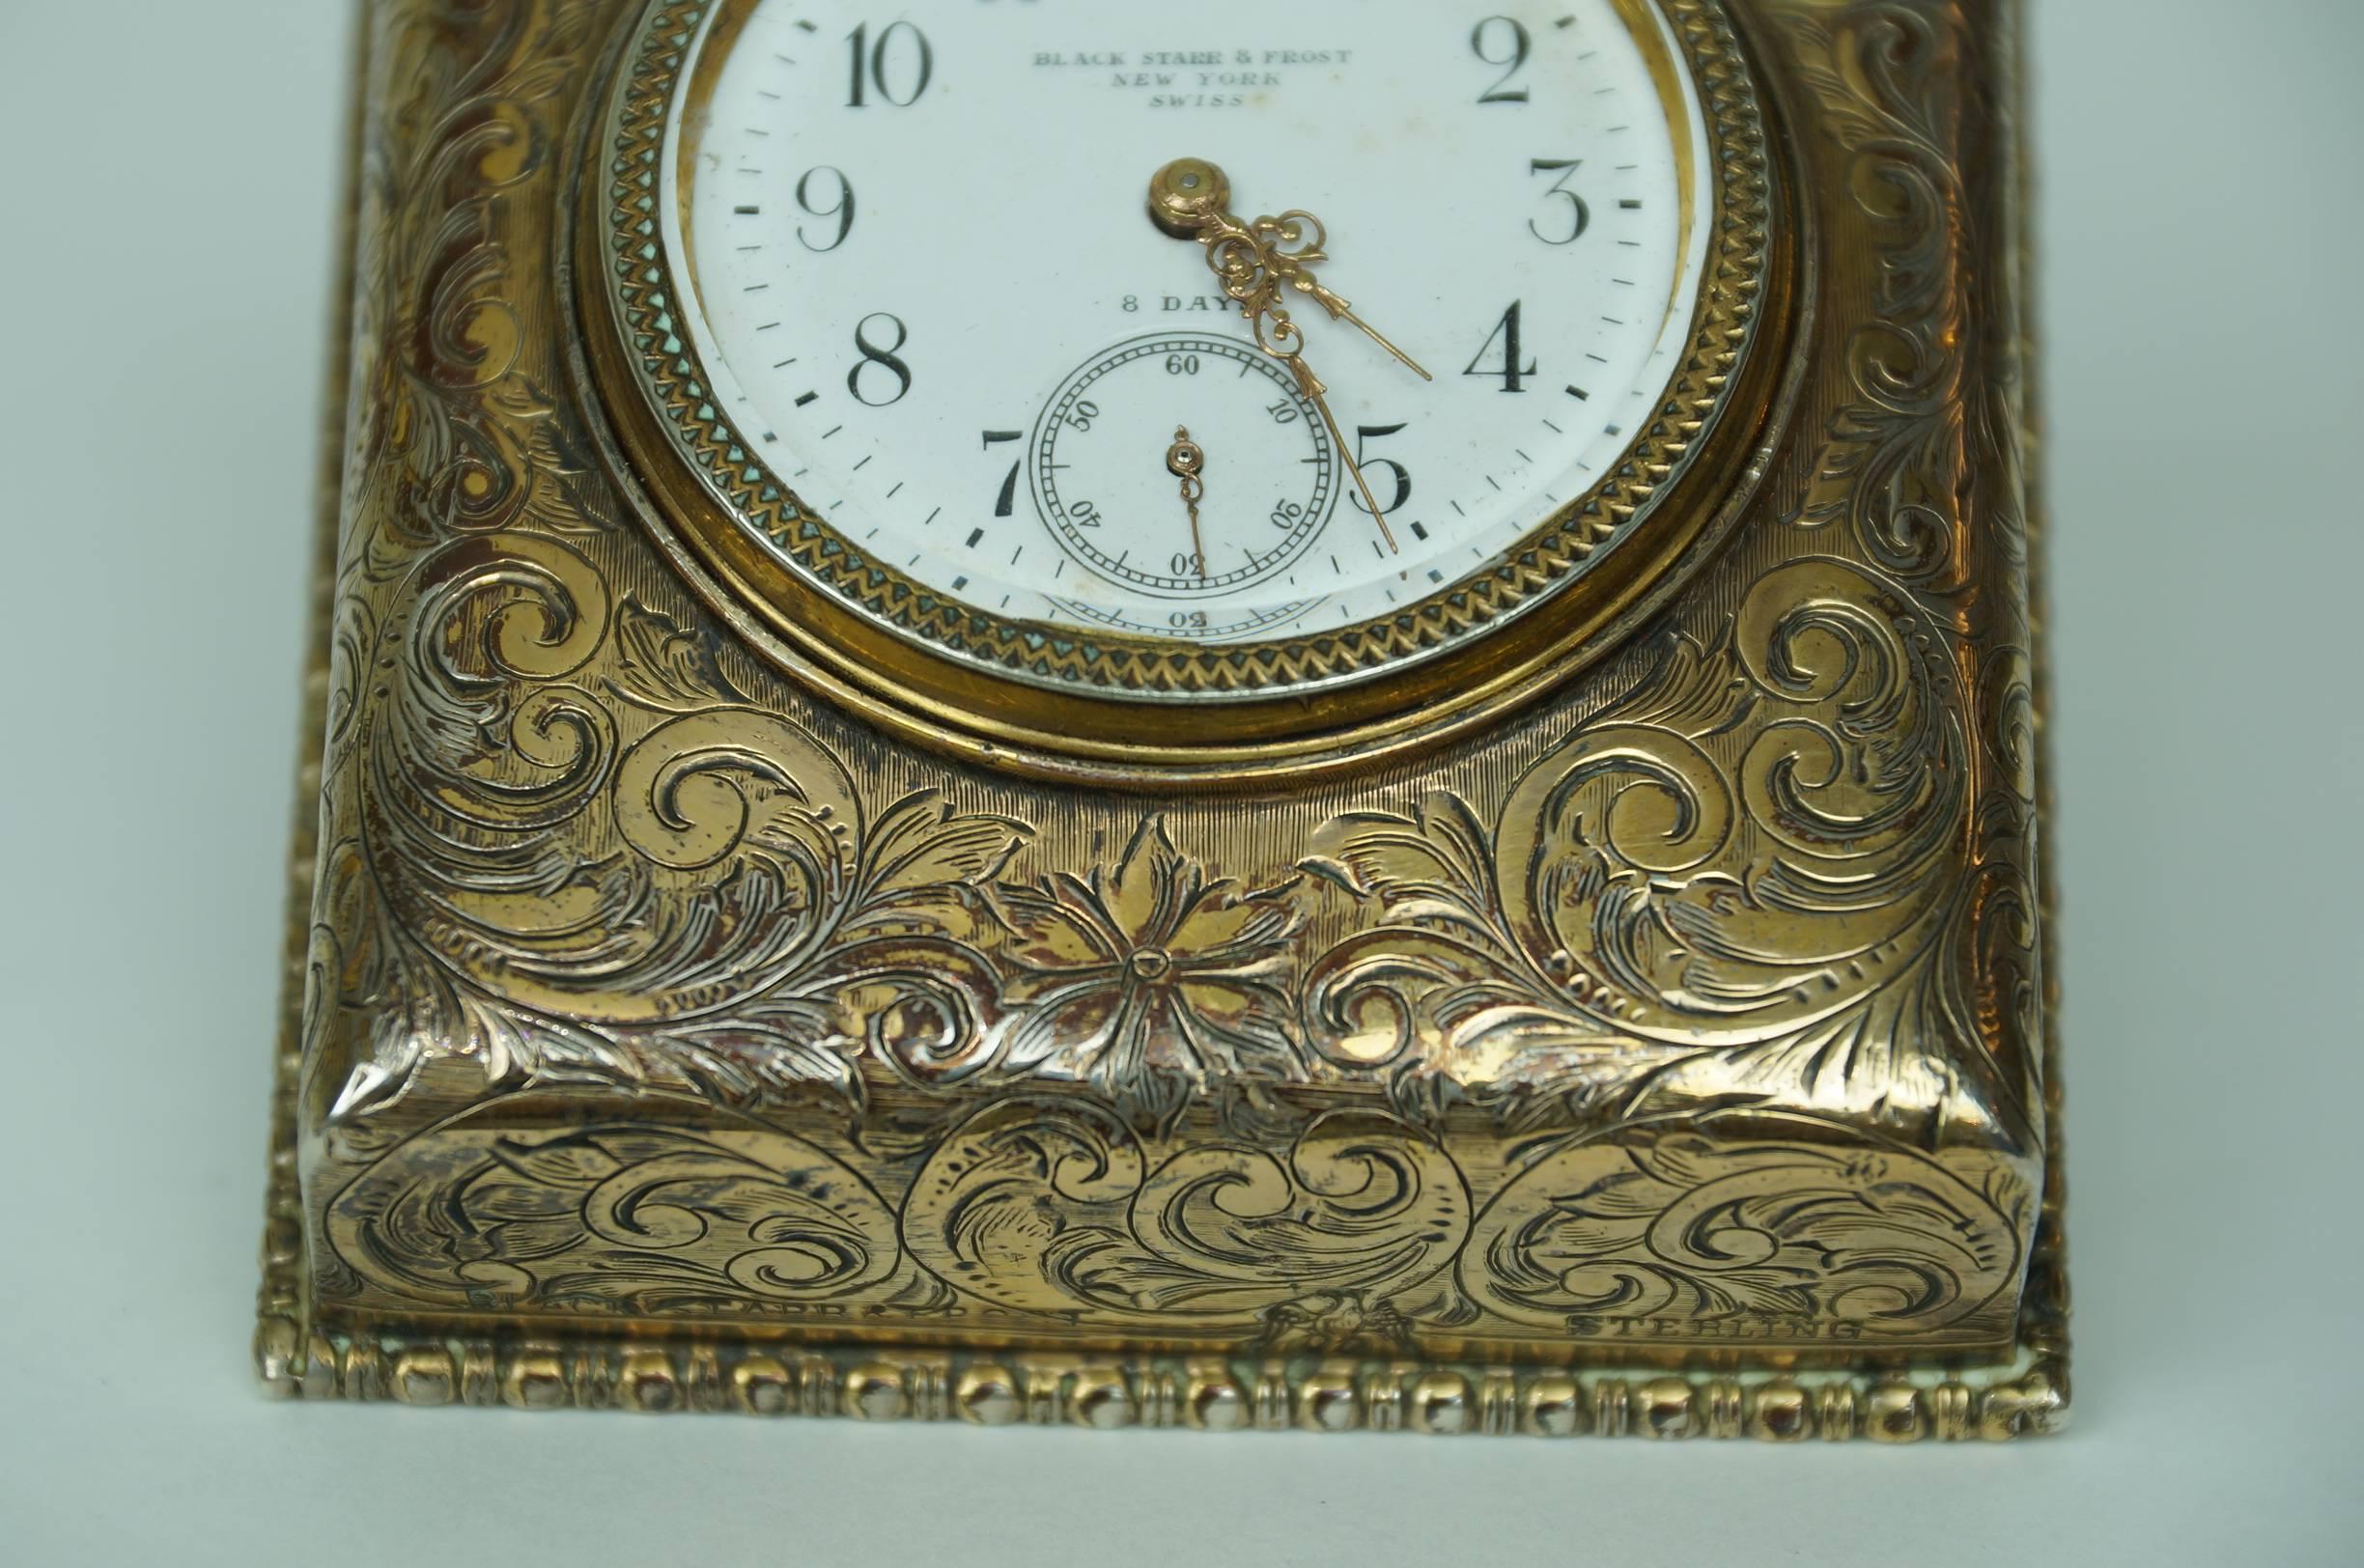 Fine Silver Desk Clock by Black Starr and Frost In Good Condition In New York, NY